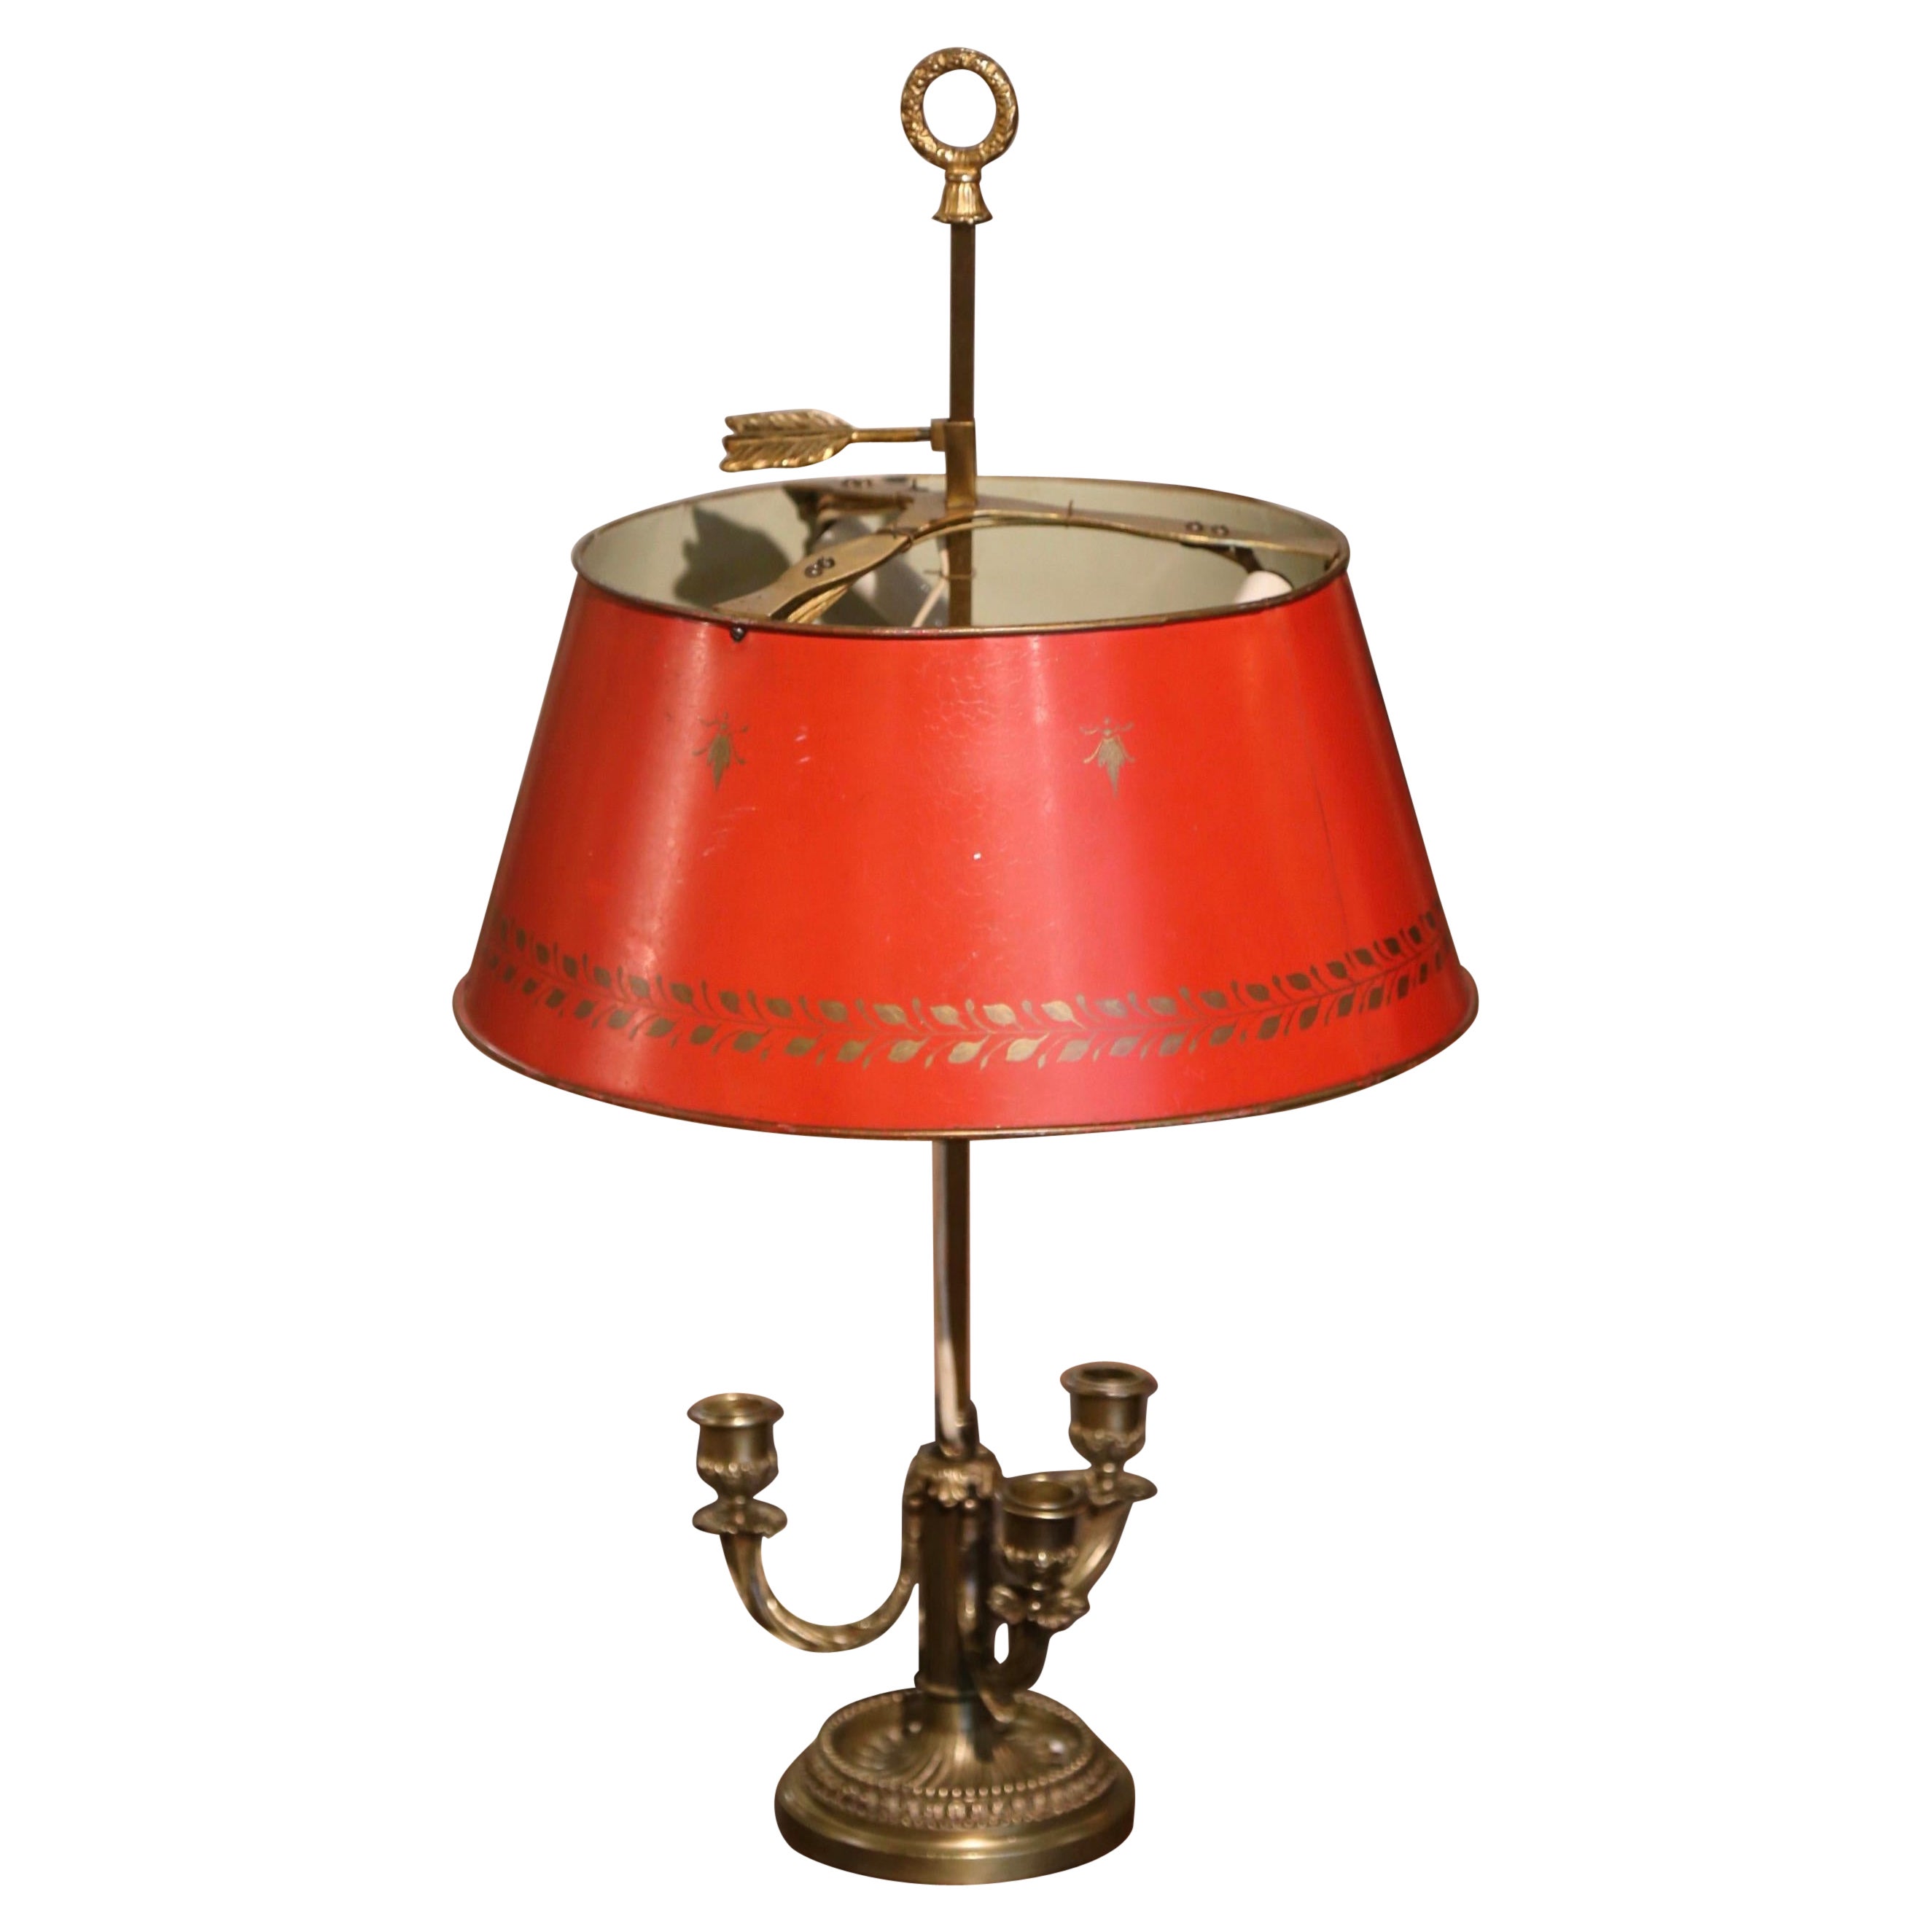 Early 20th Century French Brass & Painted Tole Three-Light Bouillotte Table Lamp